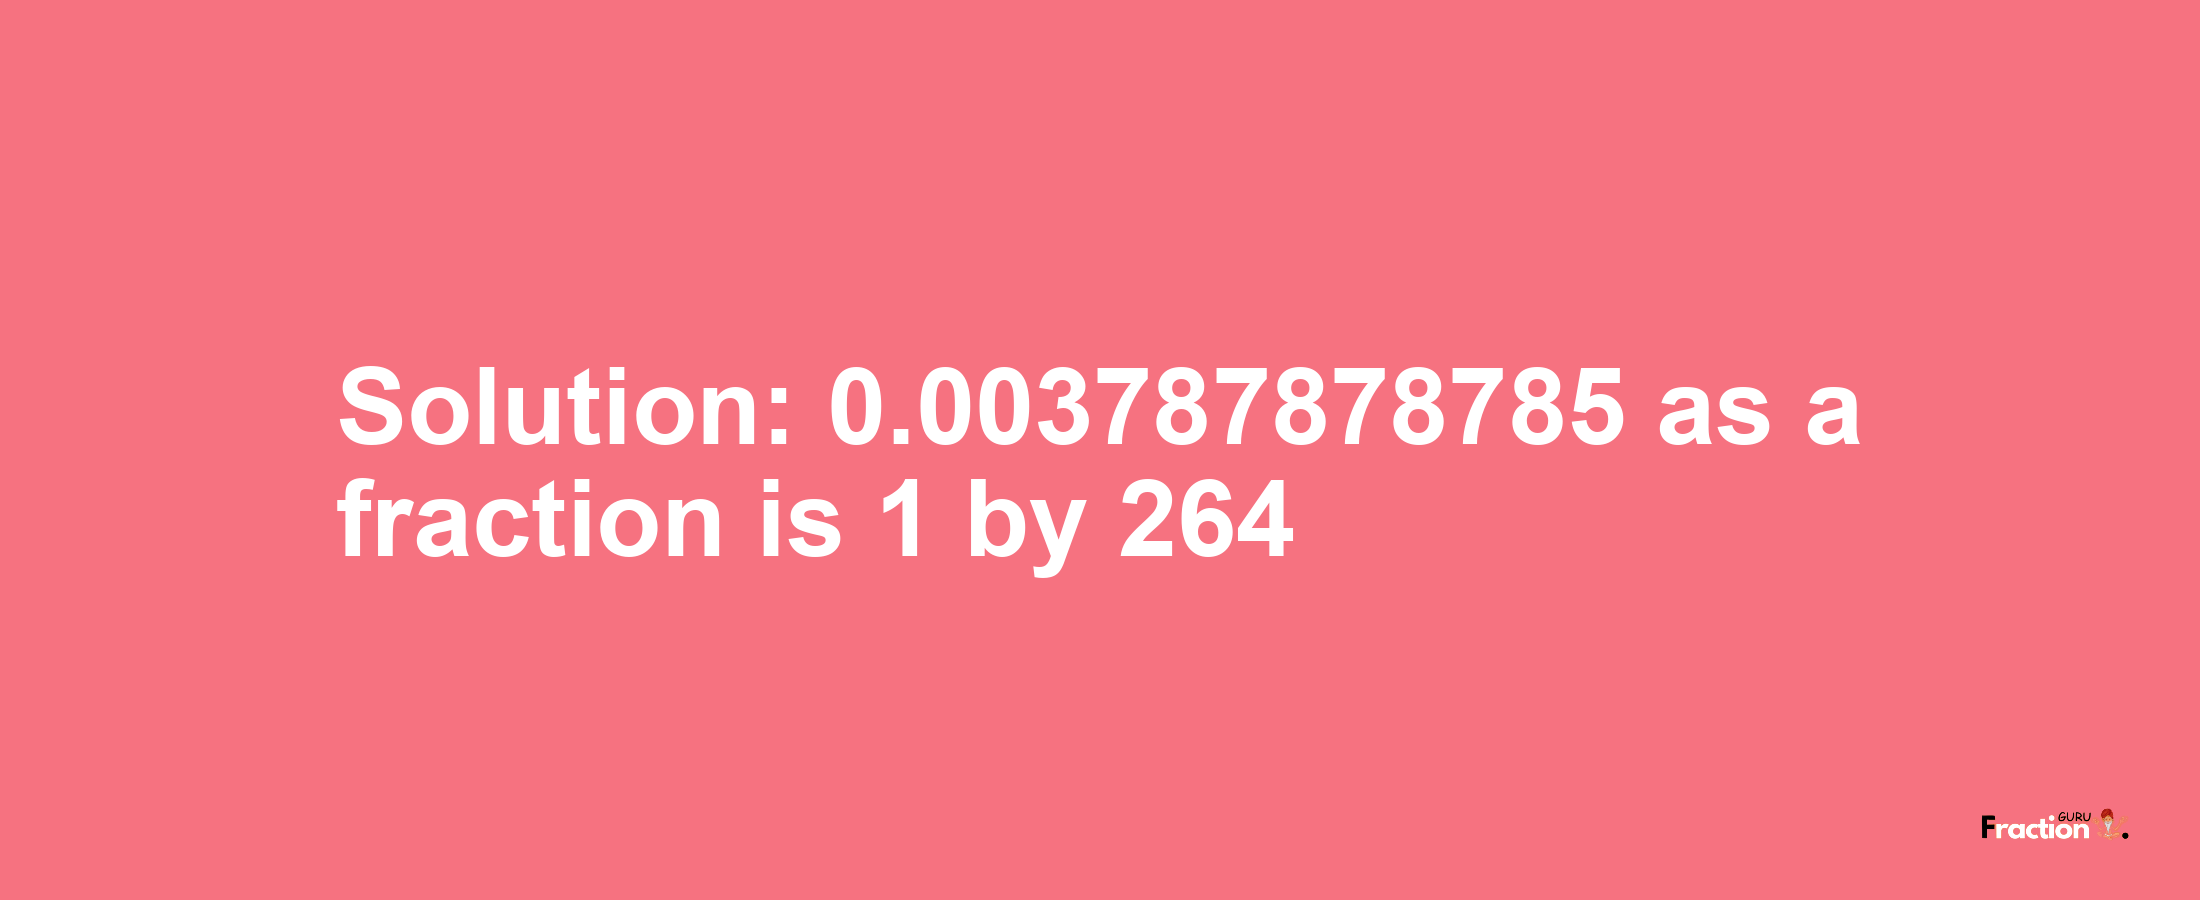 Solution:0.003787878785 as a fraction is 1/264